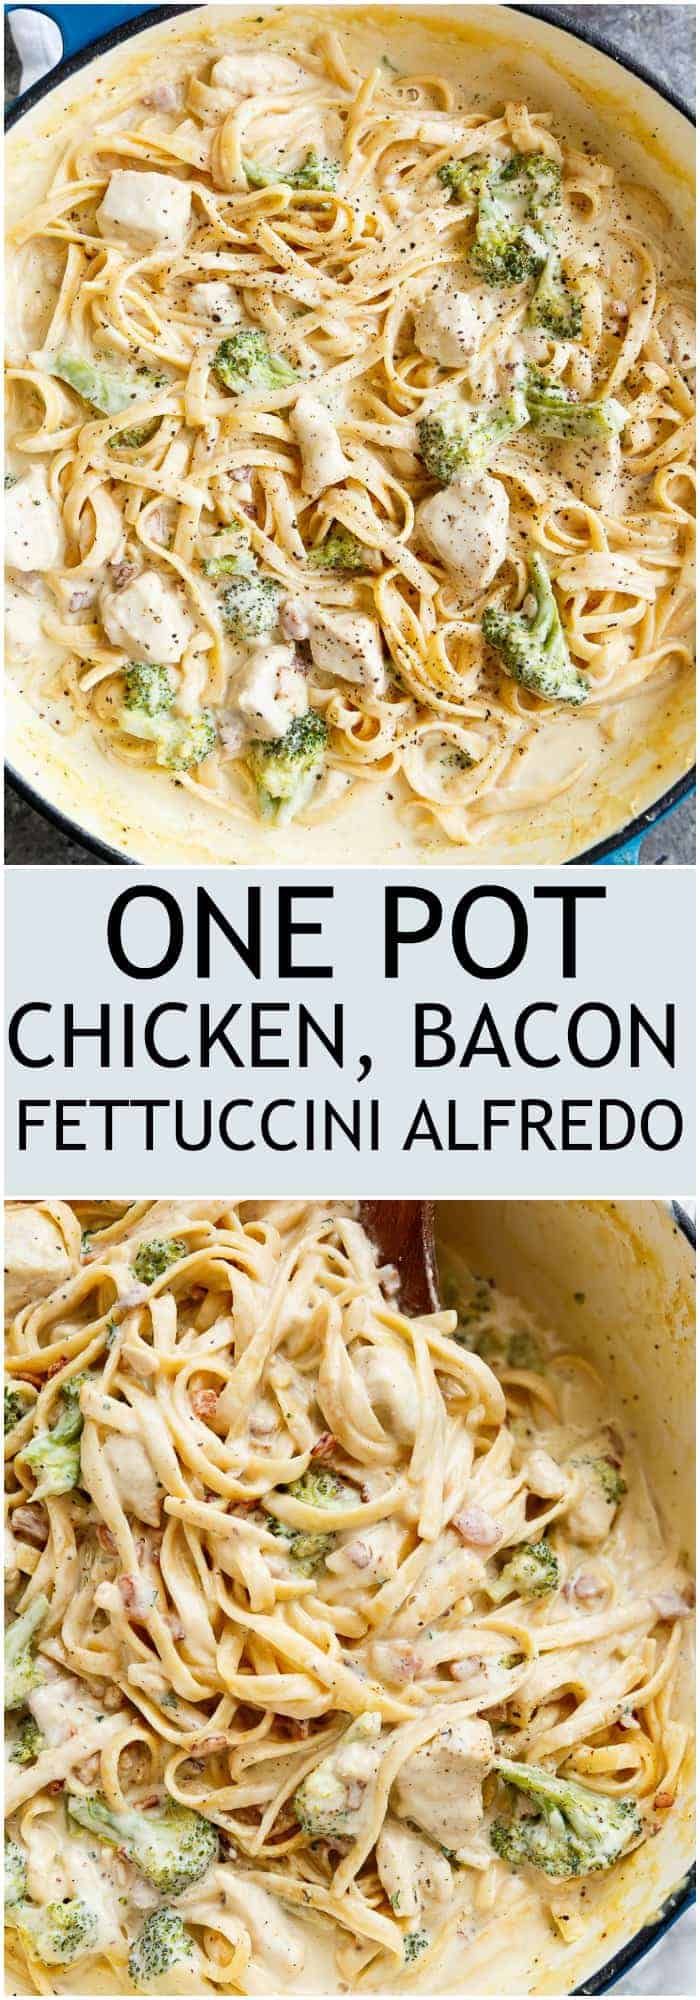 Skinny ONE POT Chicken Bacon Fettuccine Alfredo with NO HEAVY CREAM, butter or flour! Only one pot to wash up, with the pasta being cooked right IN the pot! | https://cafedelites.com